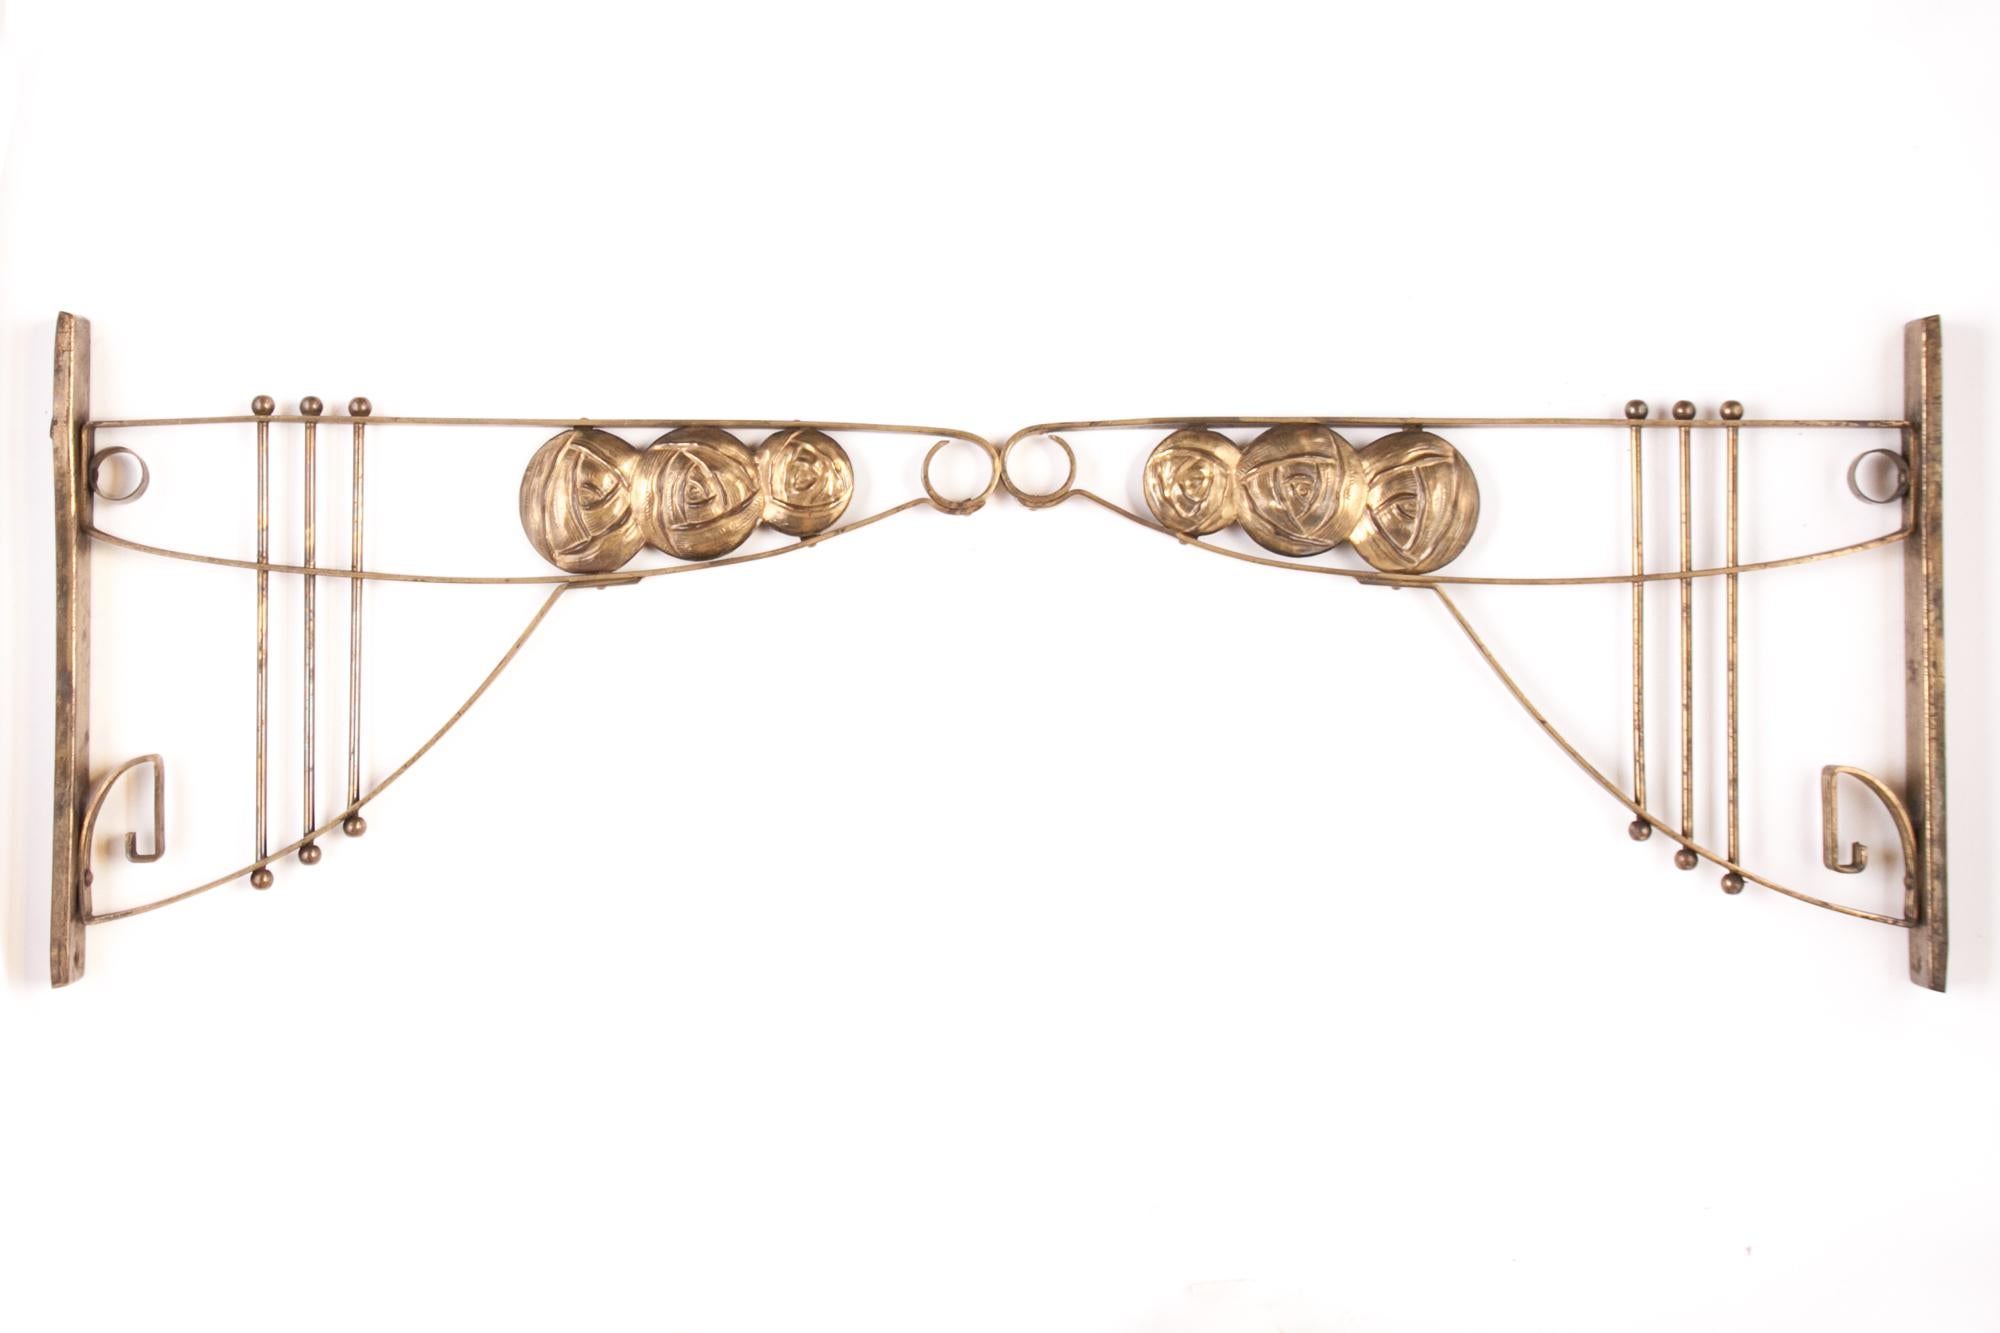 Elegant pair of brackets for wall mounting, with decorative elements in the style of the well-known Vienna Secession period, from the 1910s. They are made of brass, according to a traditional handicraft technique. The pair of brackets can ideally be